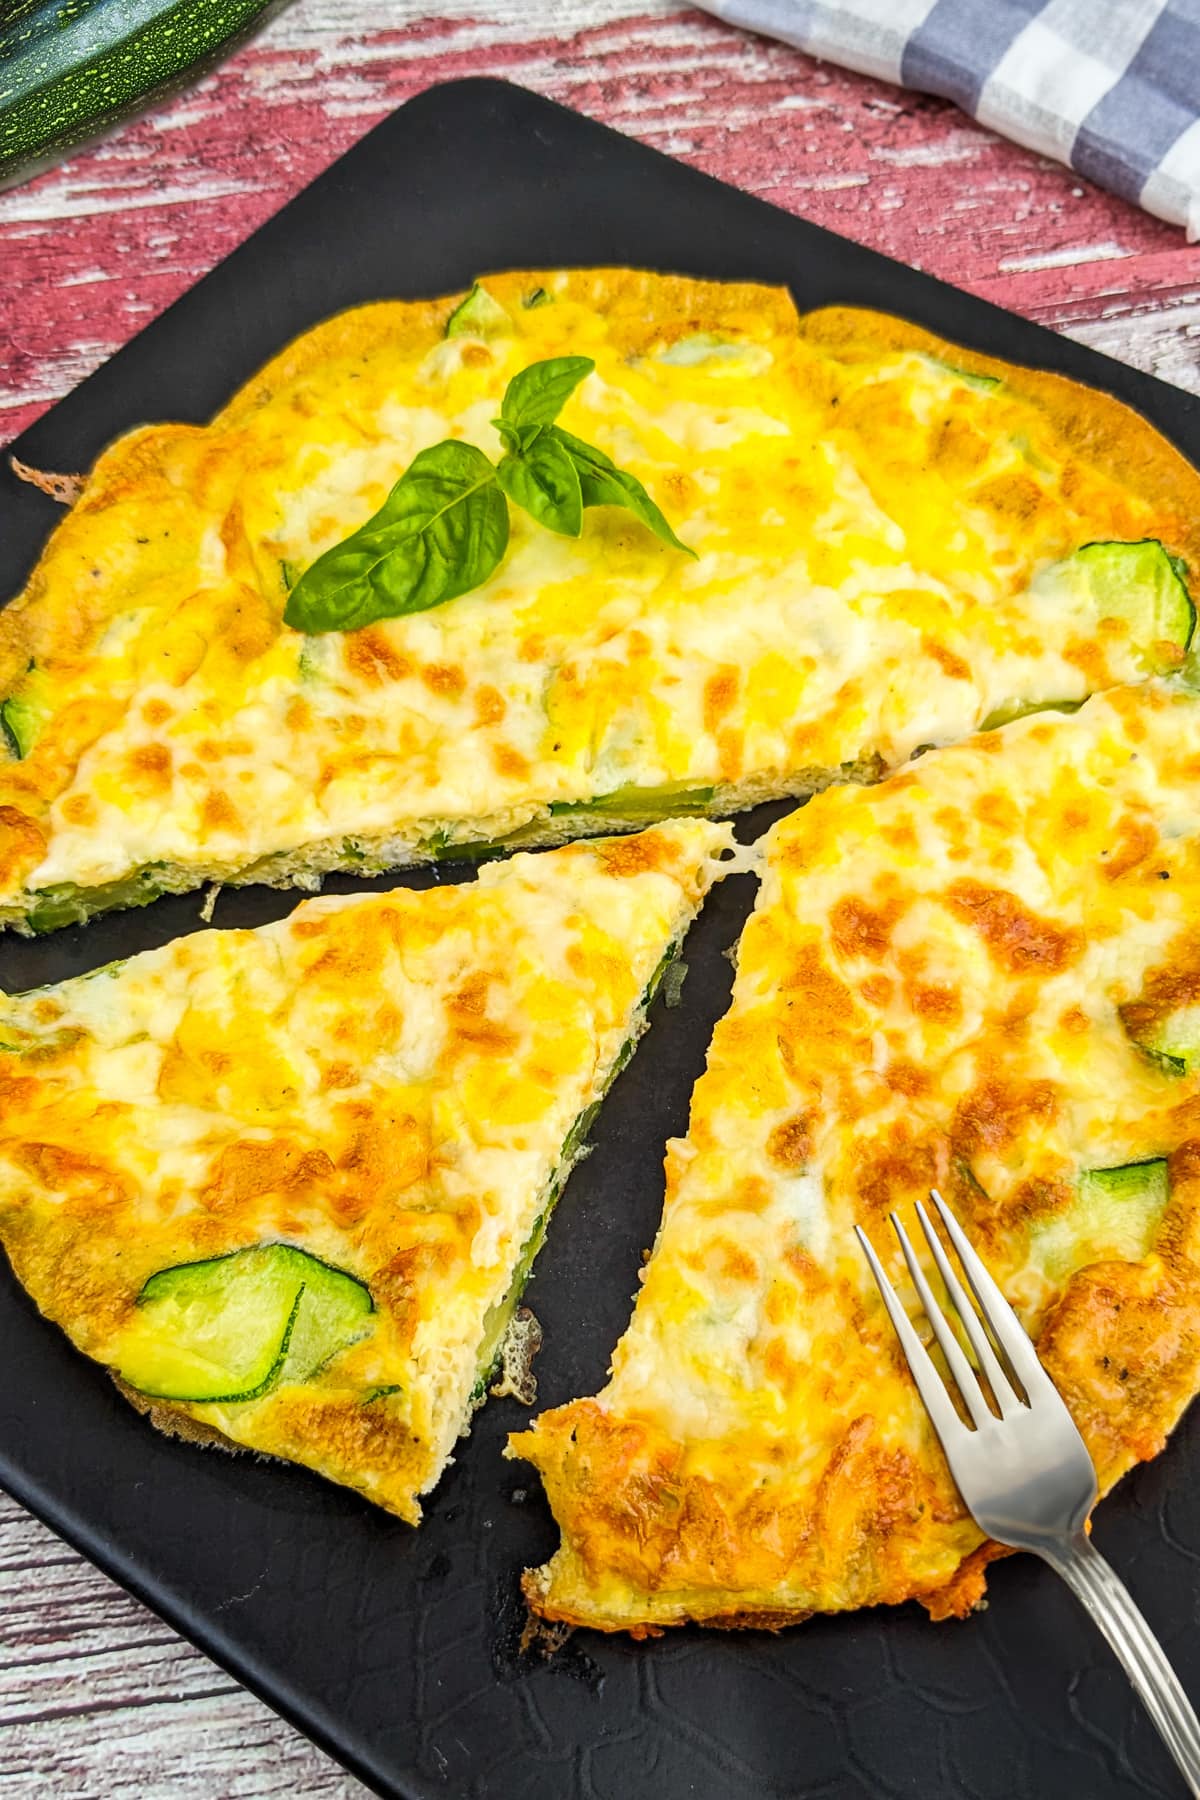 Top view of zucchini frittata with basil leaves served on a black plate.